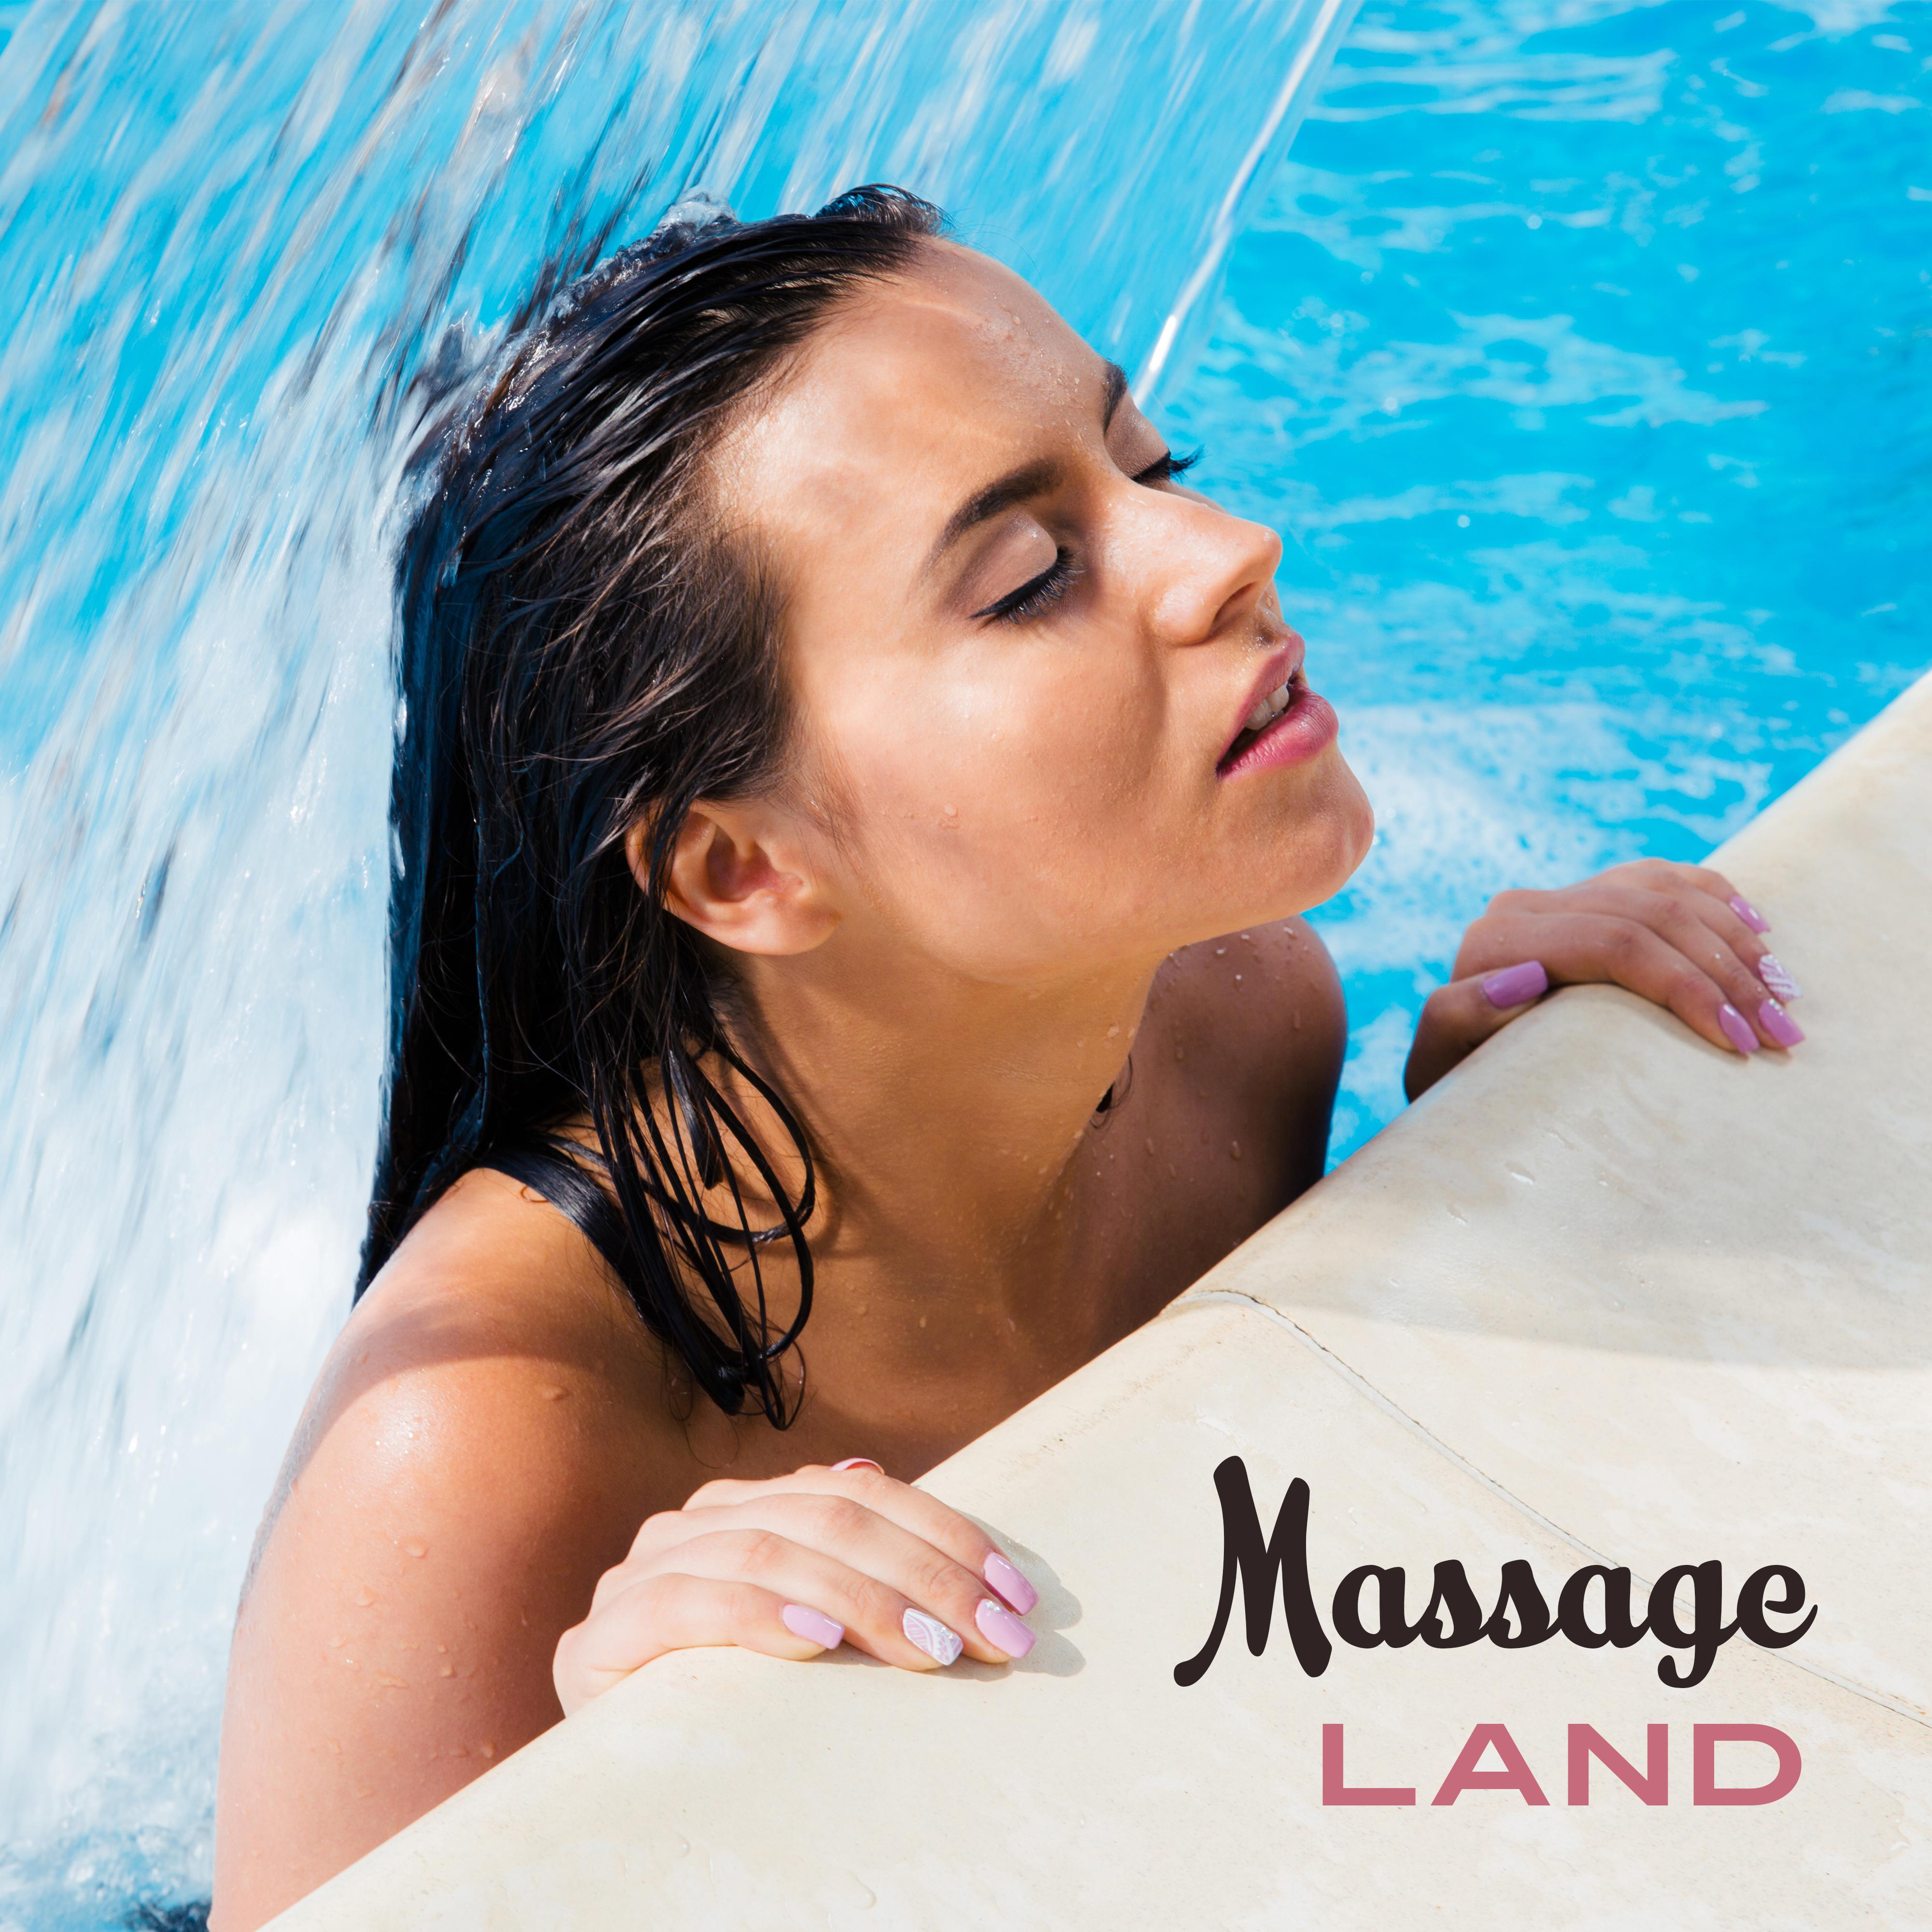 Massage Land – Relaxing Music for Variety of Massage, Chocolate Massage, Classic Massage, Spa, Relaxation